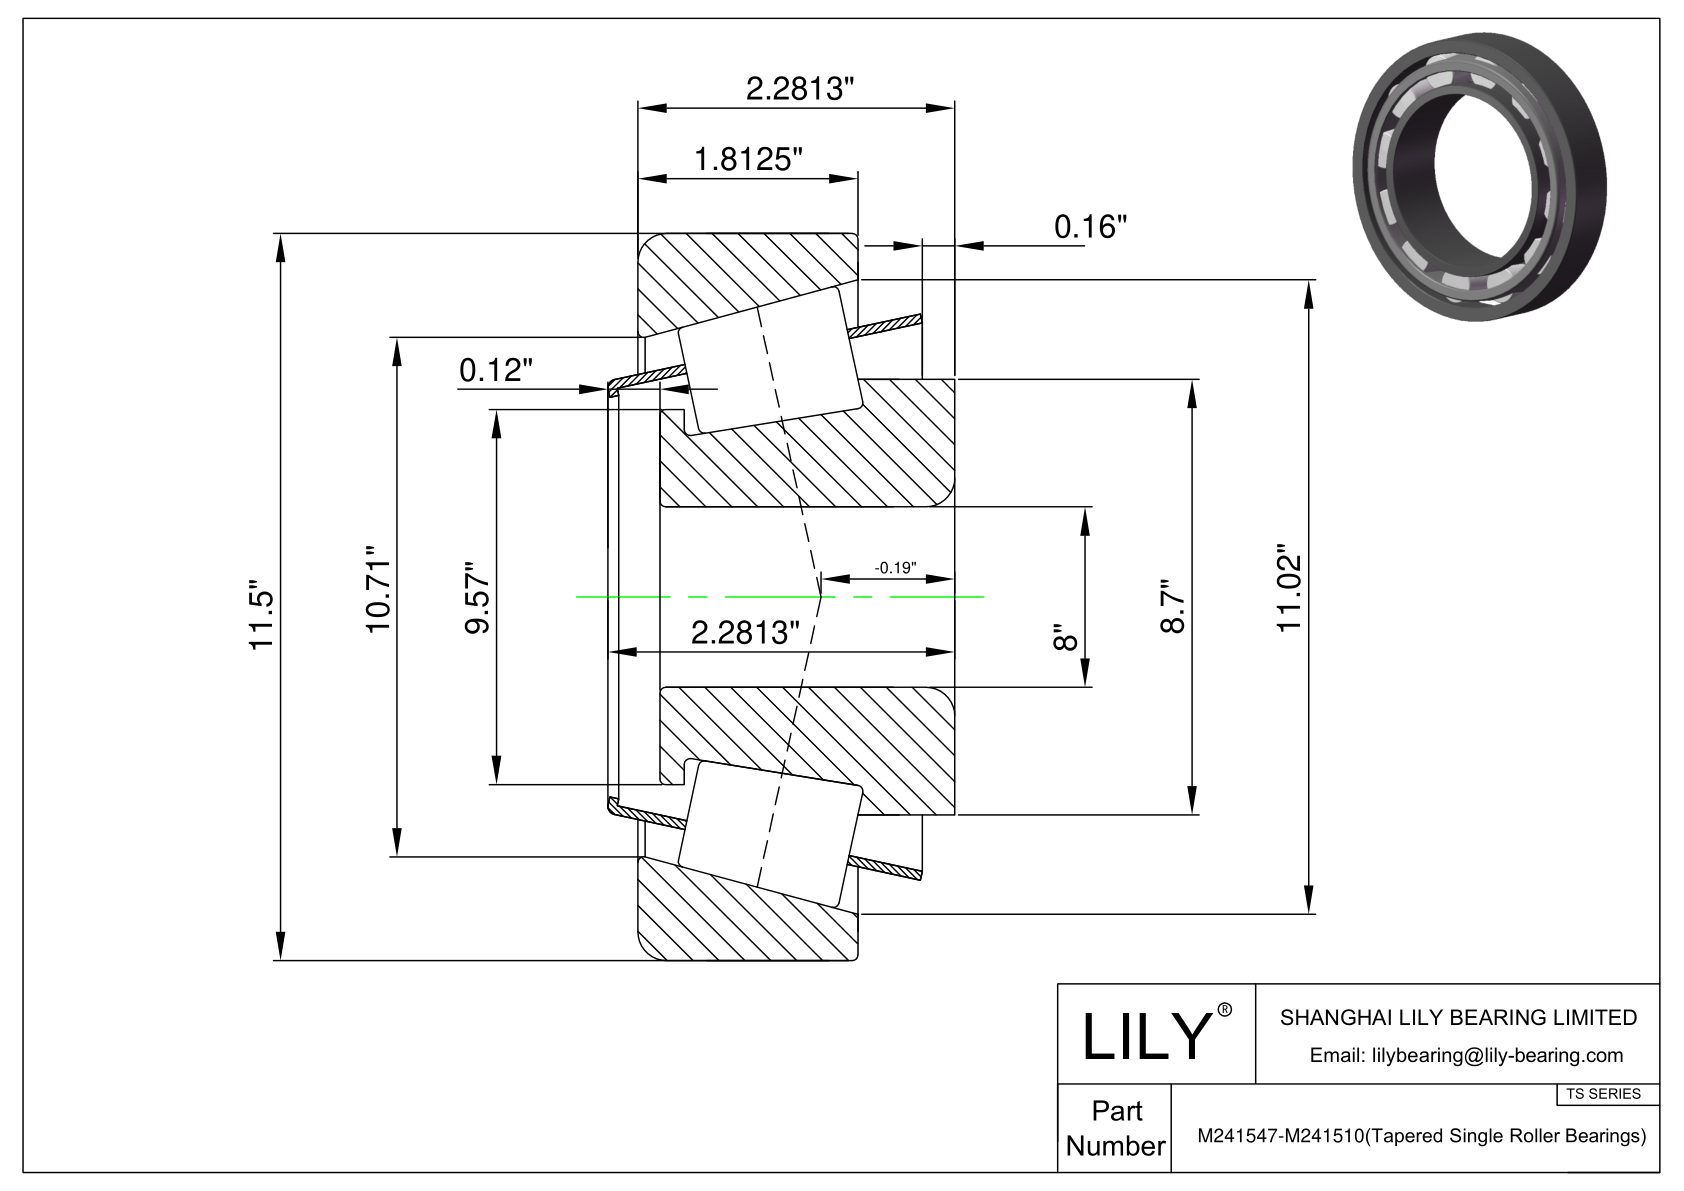 M241547-M241510 TS (Tapered Single Roller Bearings) (Imperial) cad drawing